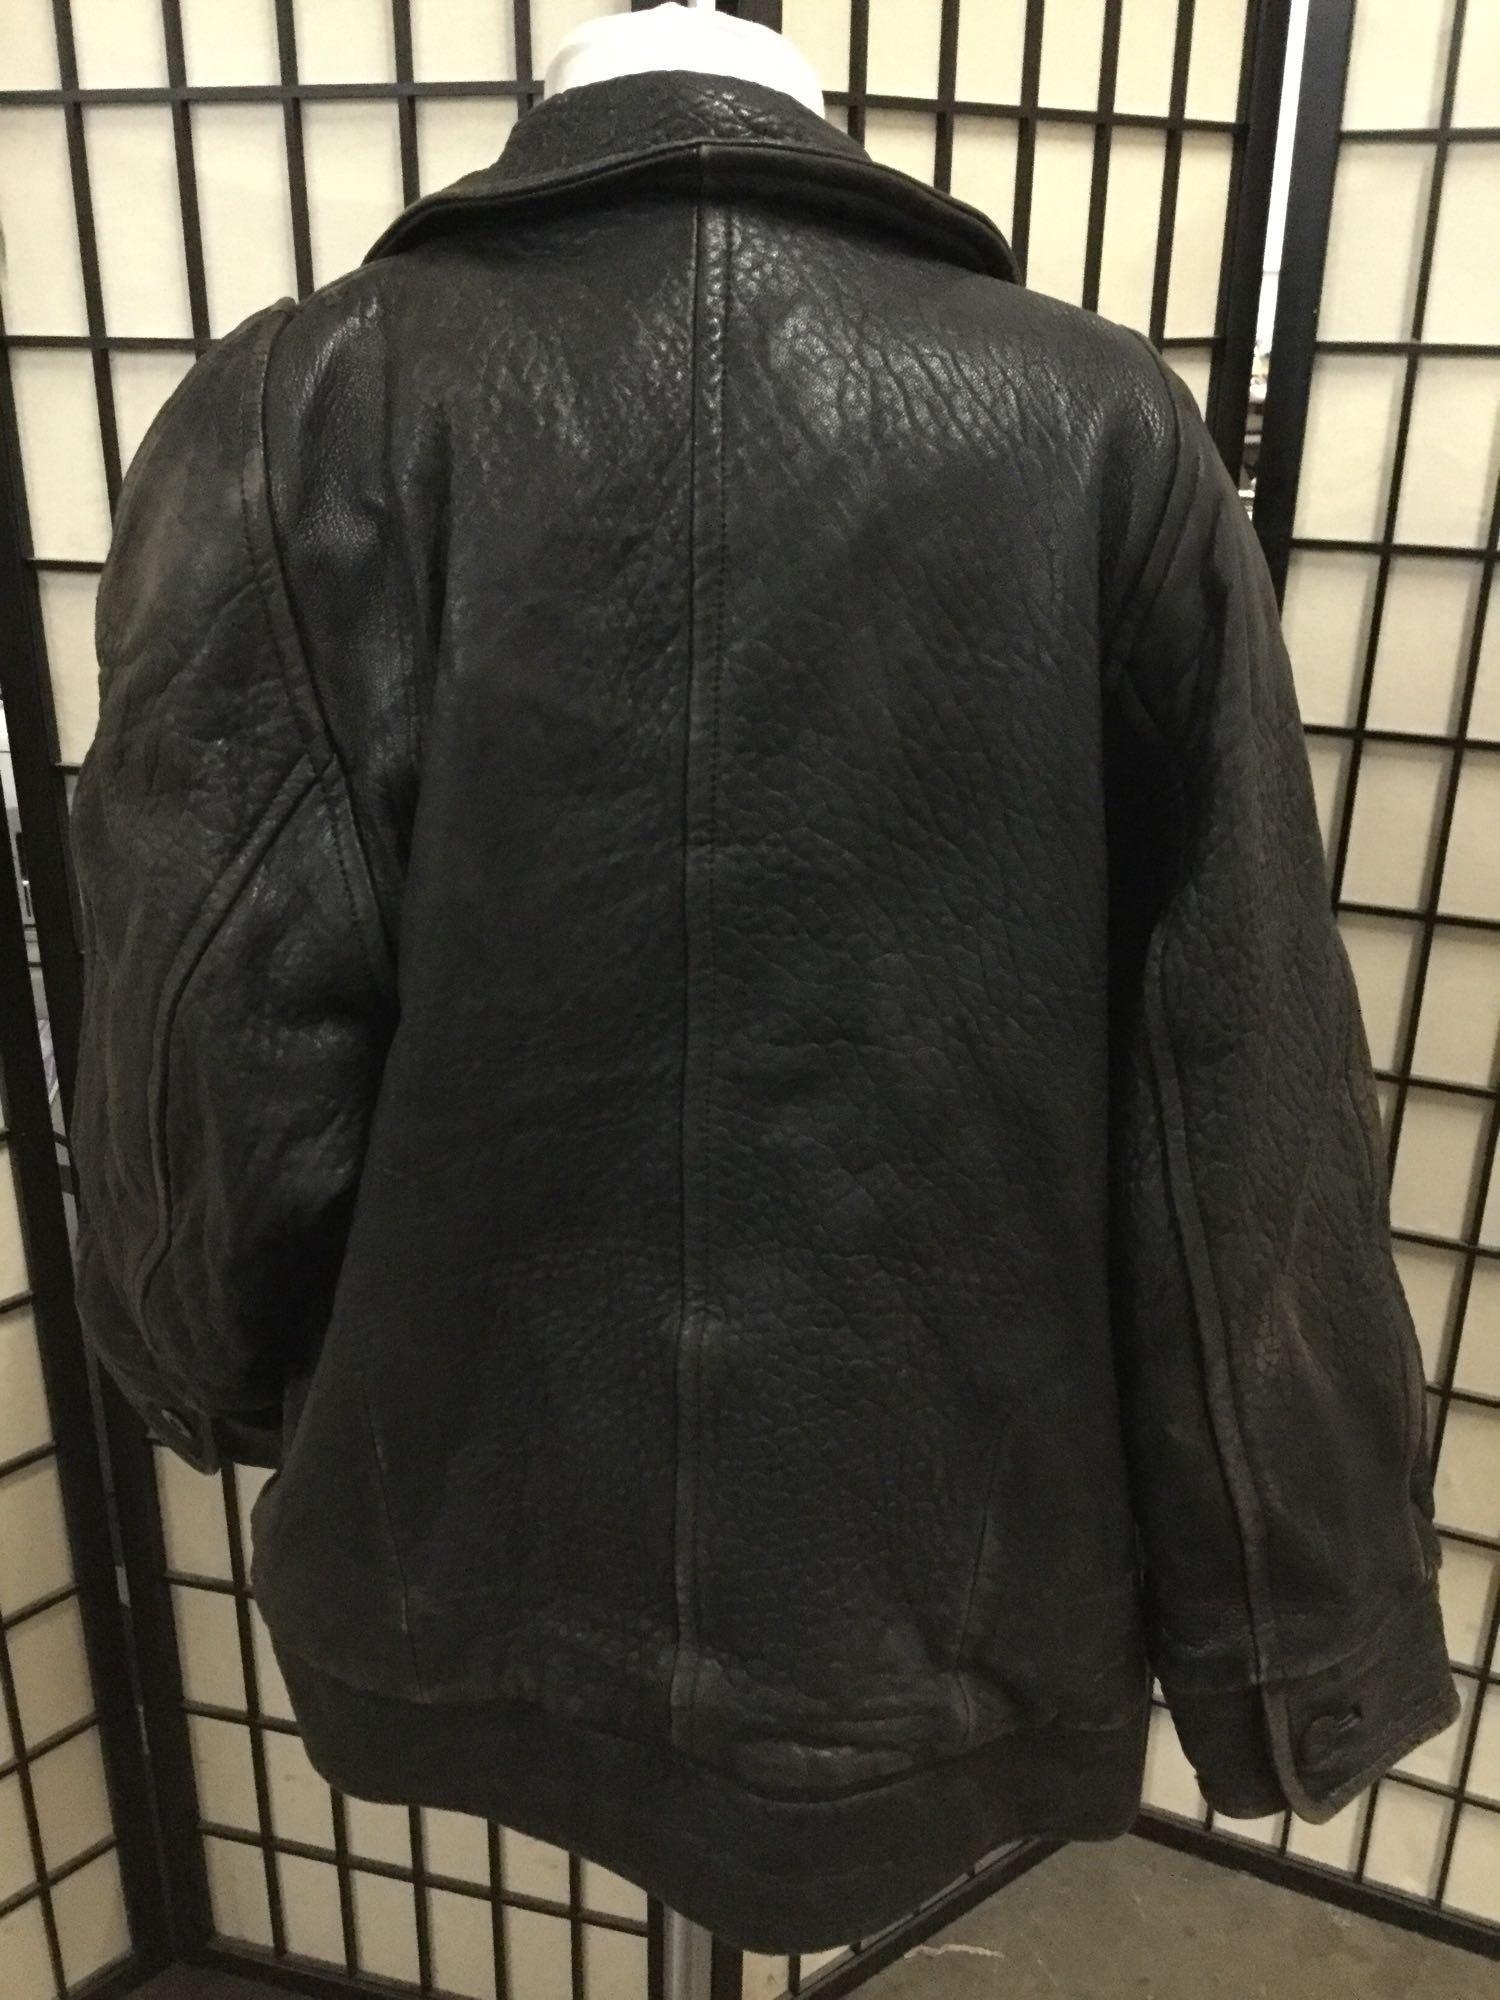 J and R leather jacket made in Korea approx size Large 28 x 20 inches.